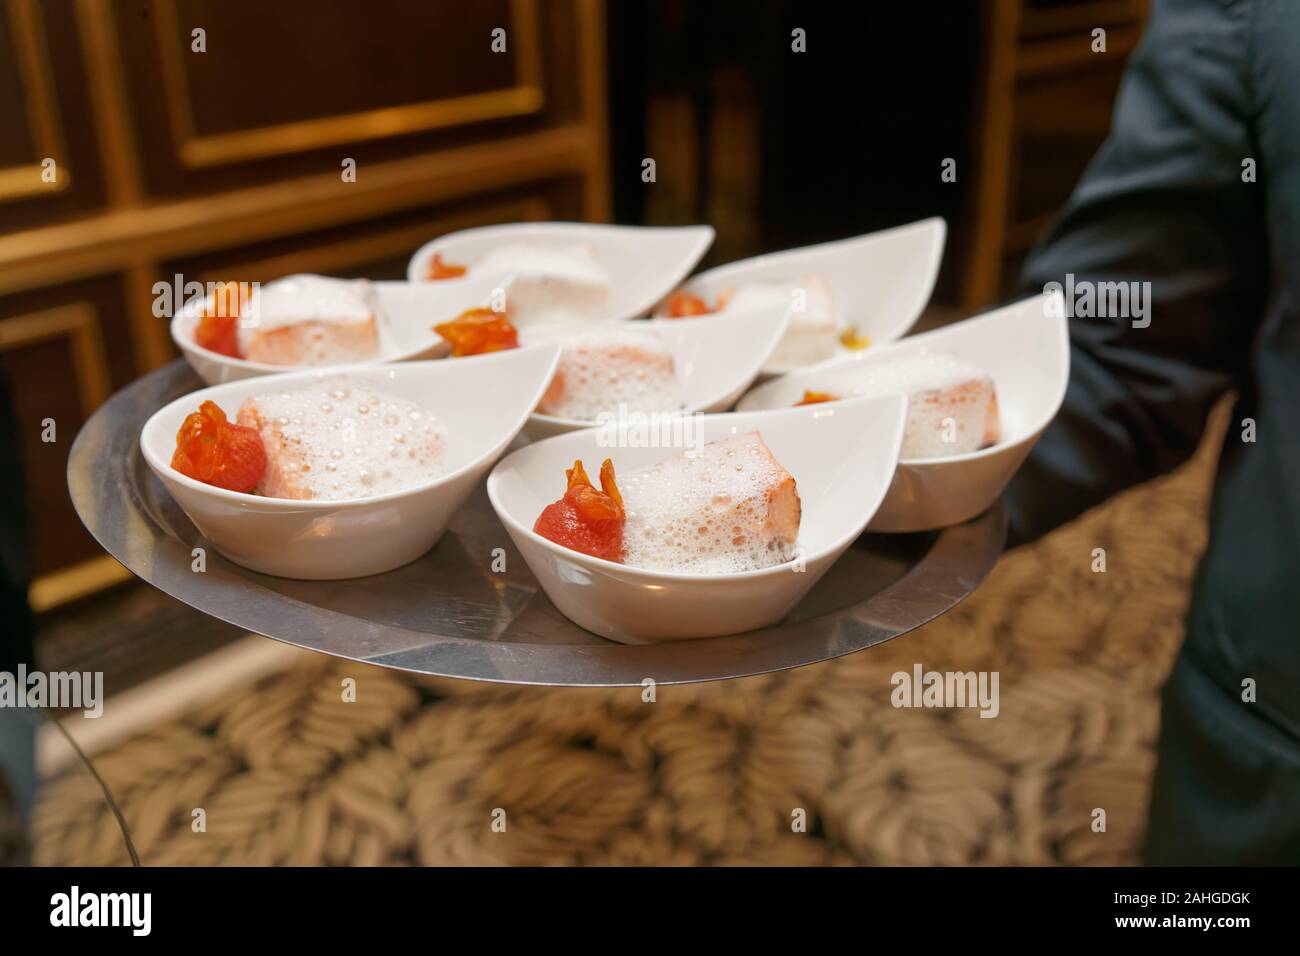 Waiter carries tray with banquet food plates - salmon and foamy sauce Stock Photo